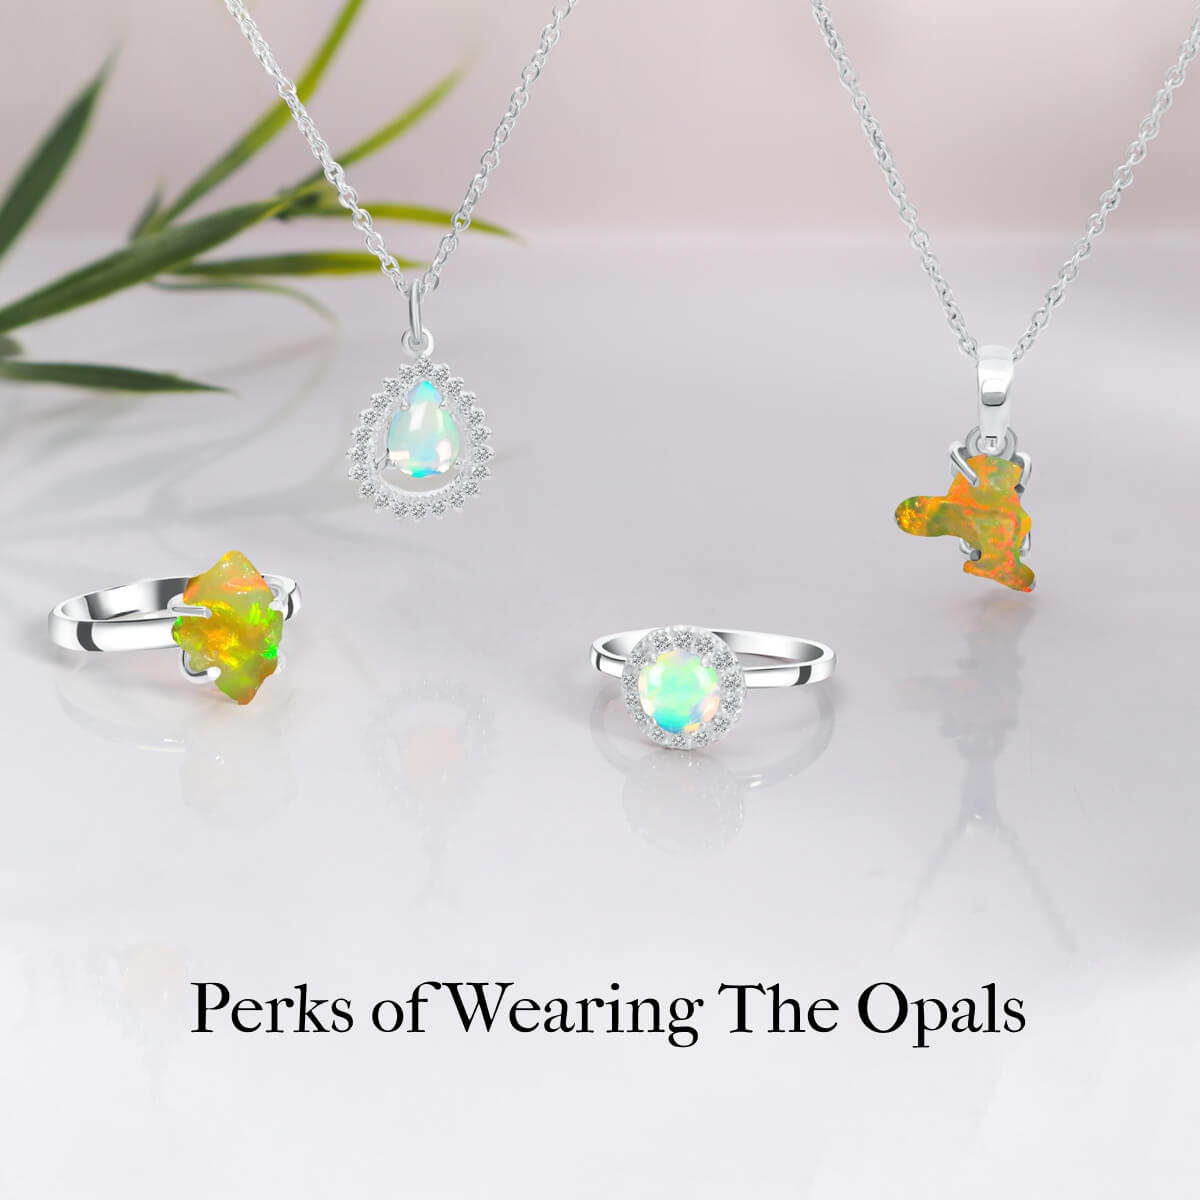 Benefits of wearing the Opals